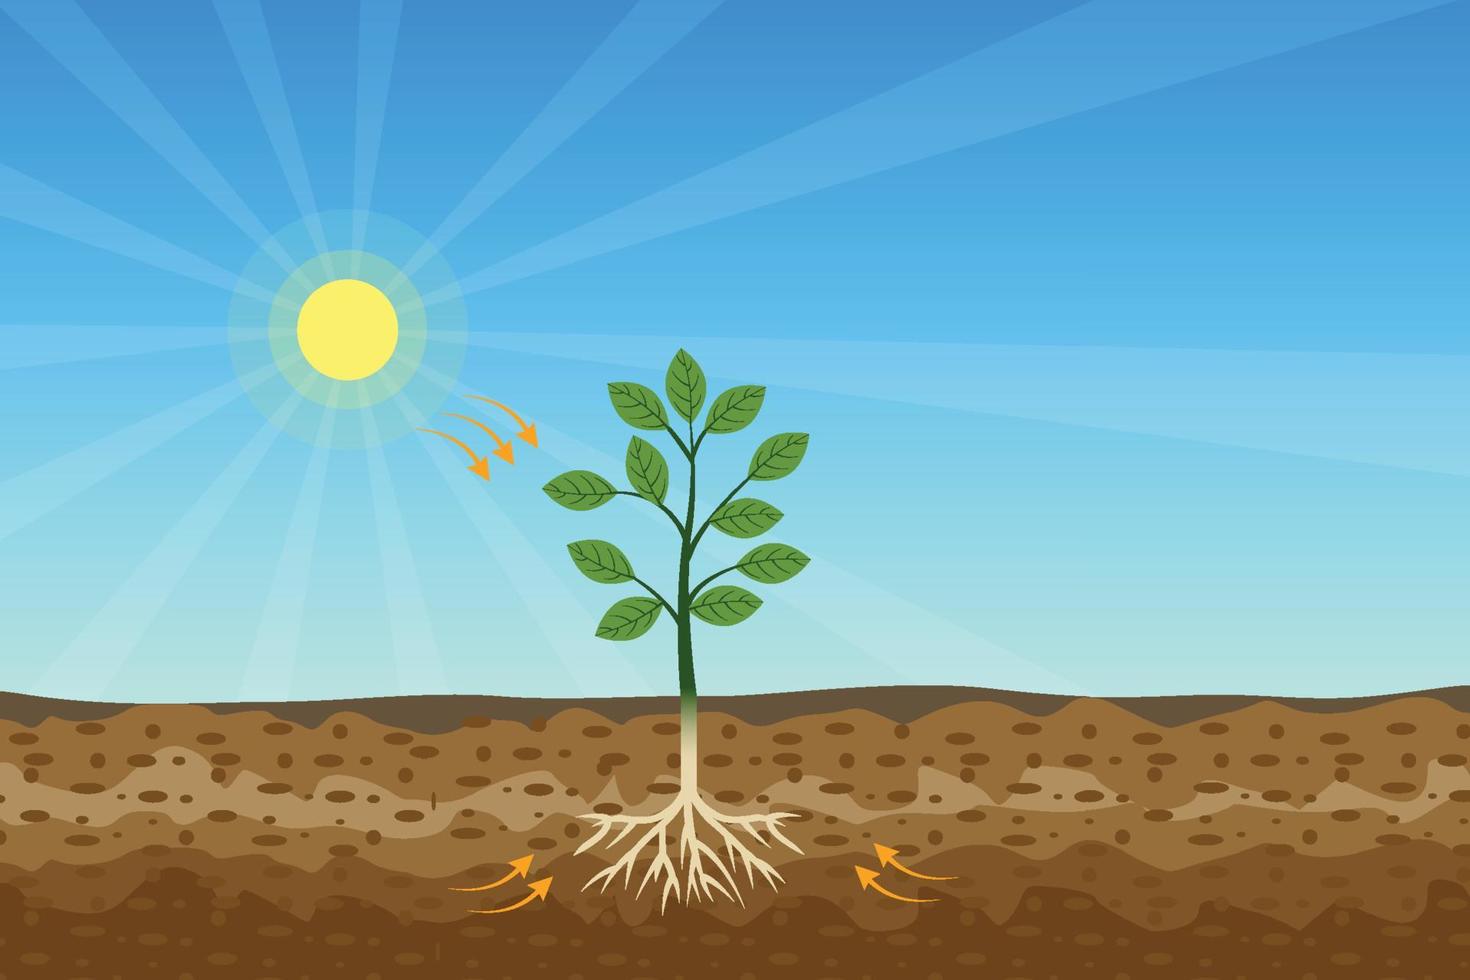 Photosynthesis process with green tree and shiny sun and hard soil vector. A tree gets nutrition from the sun and soil. A green plant is producing oxygen and sugar from the sunlight and minerals. vector